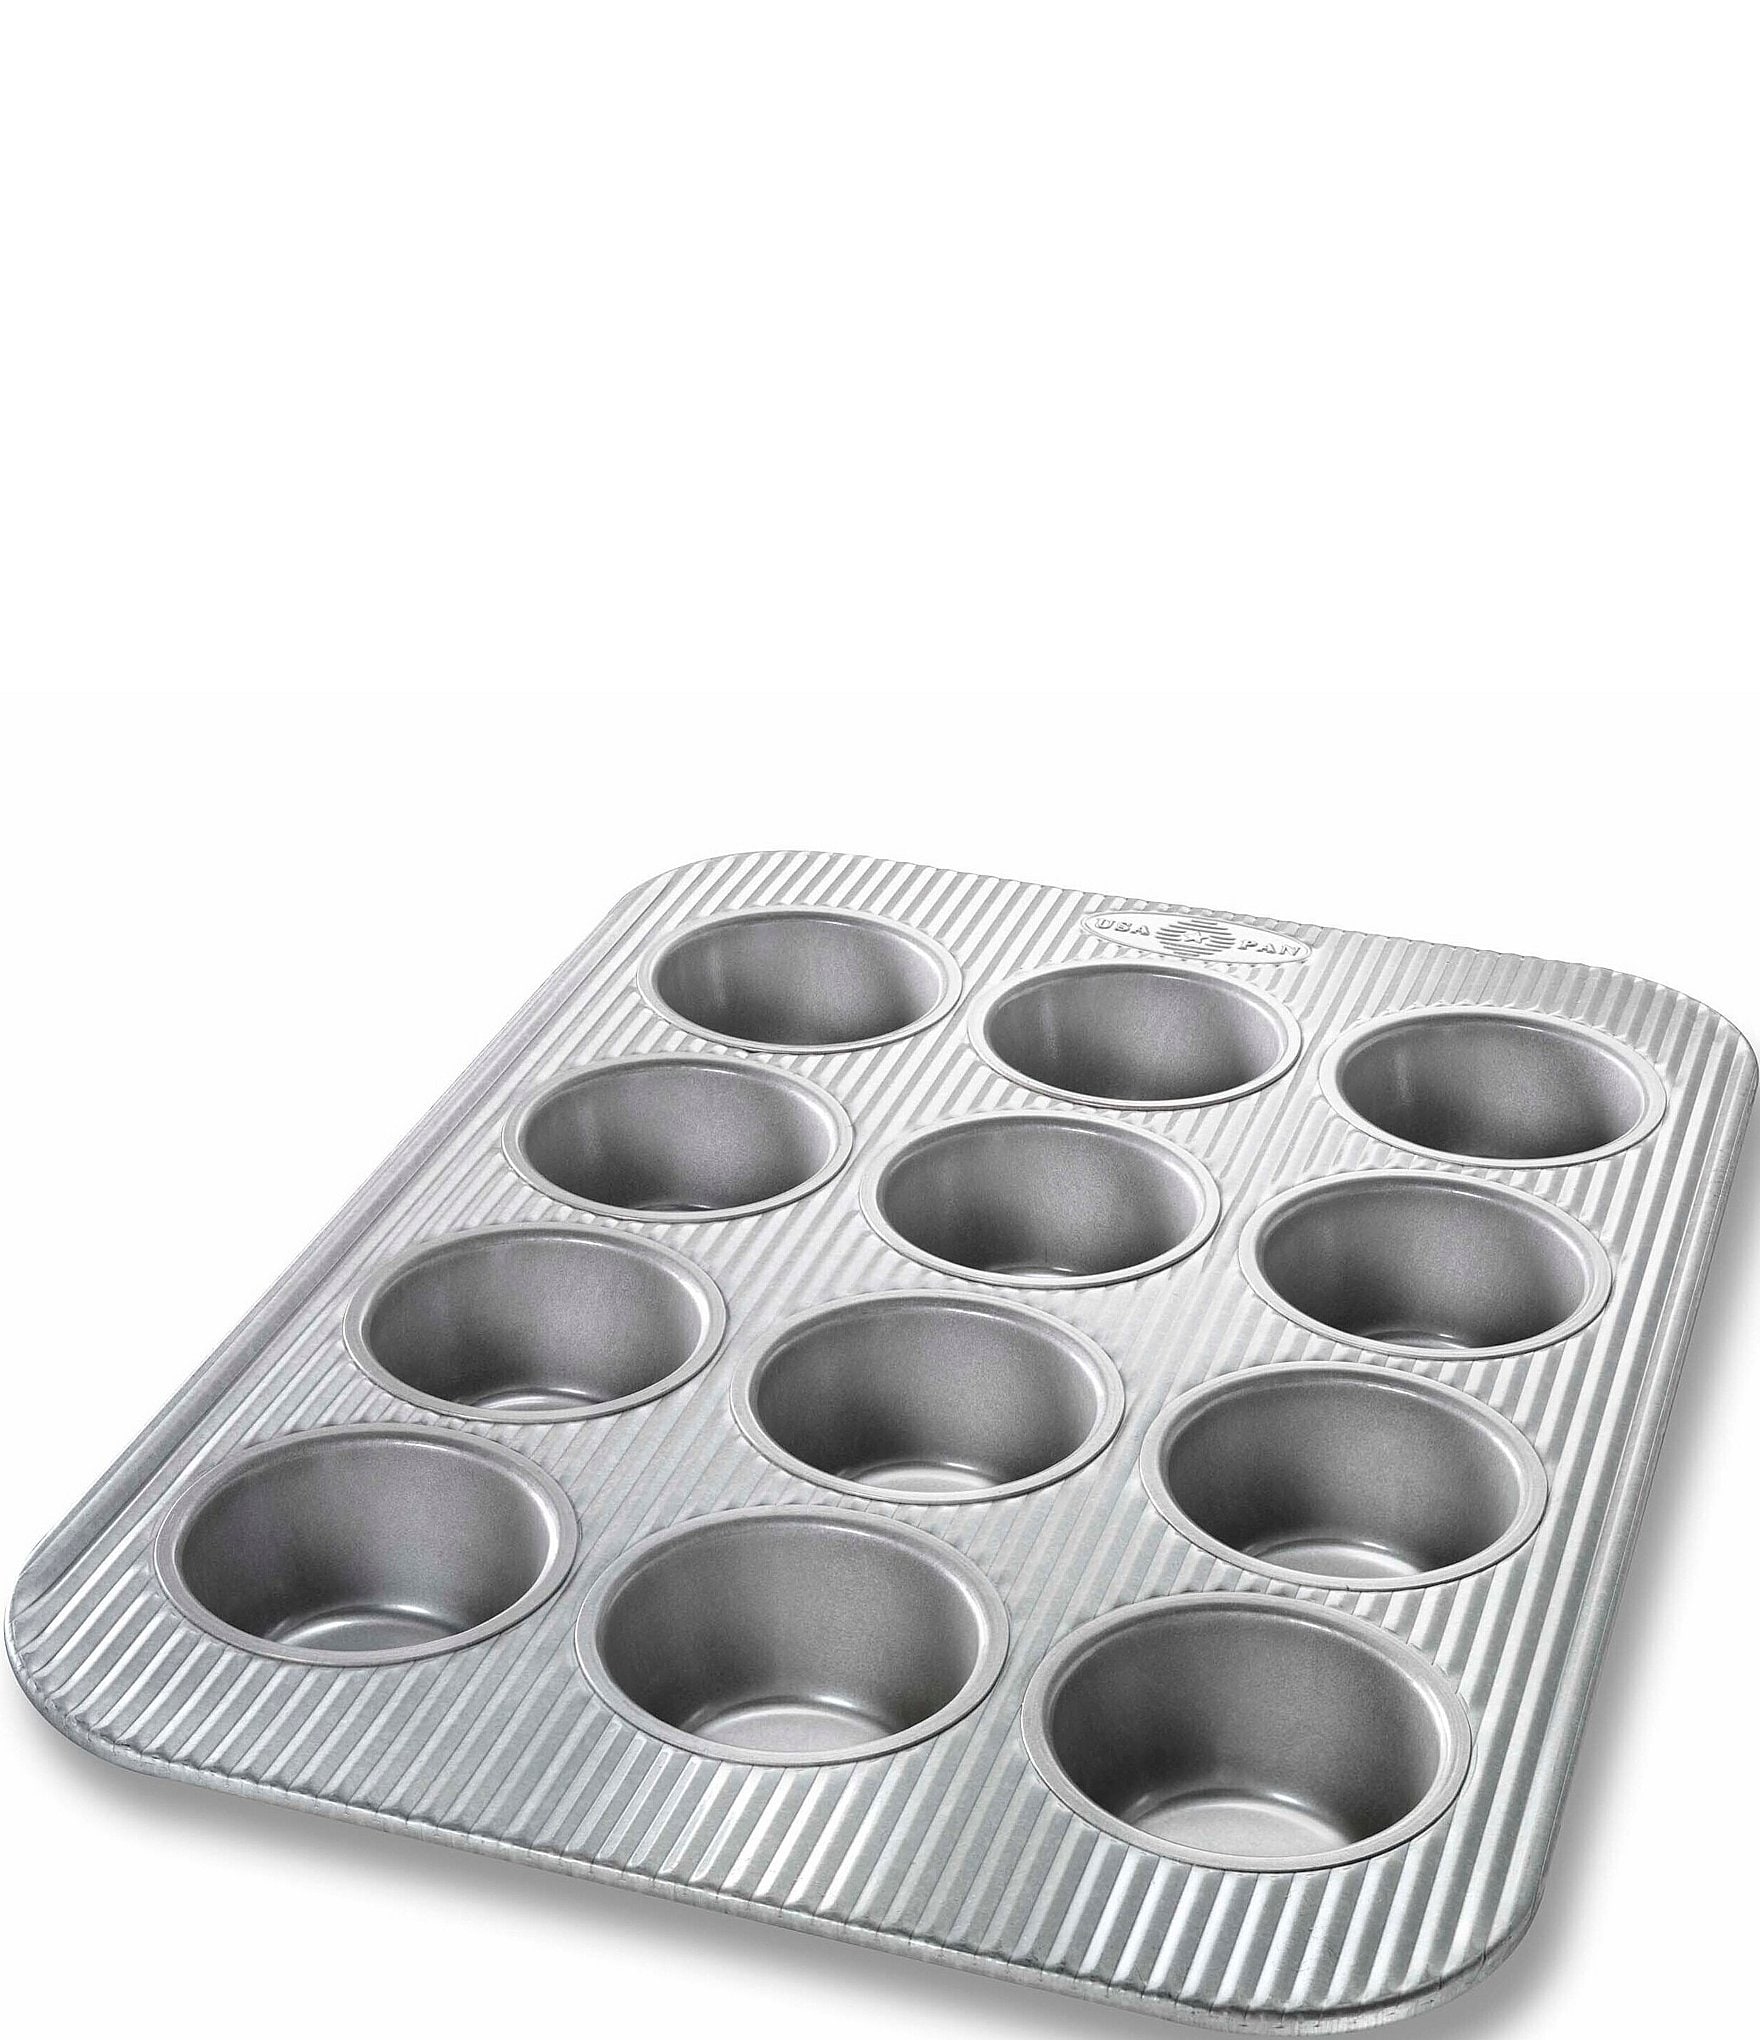 Heavy Duty Aluminum Foil Texture Cookie Sheet With Label 15.75